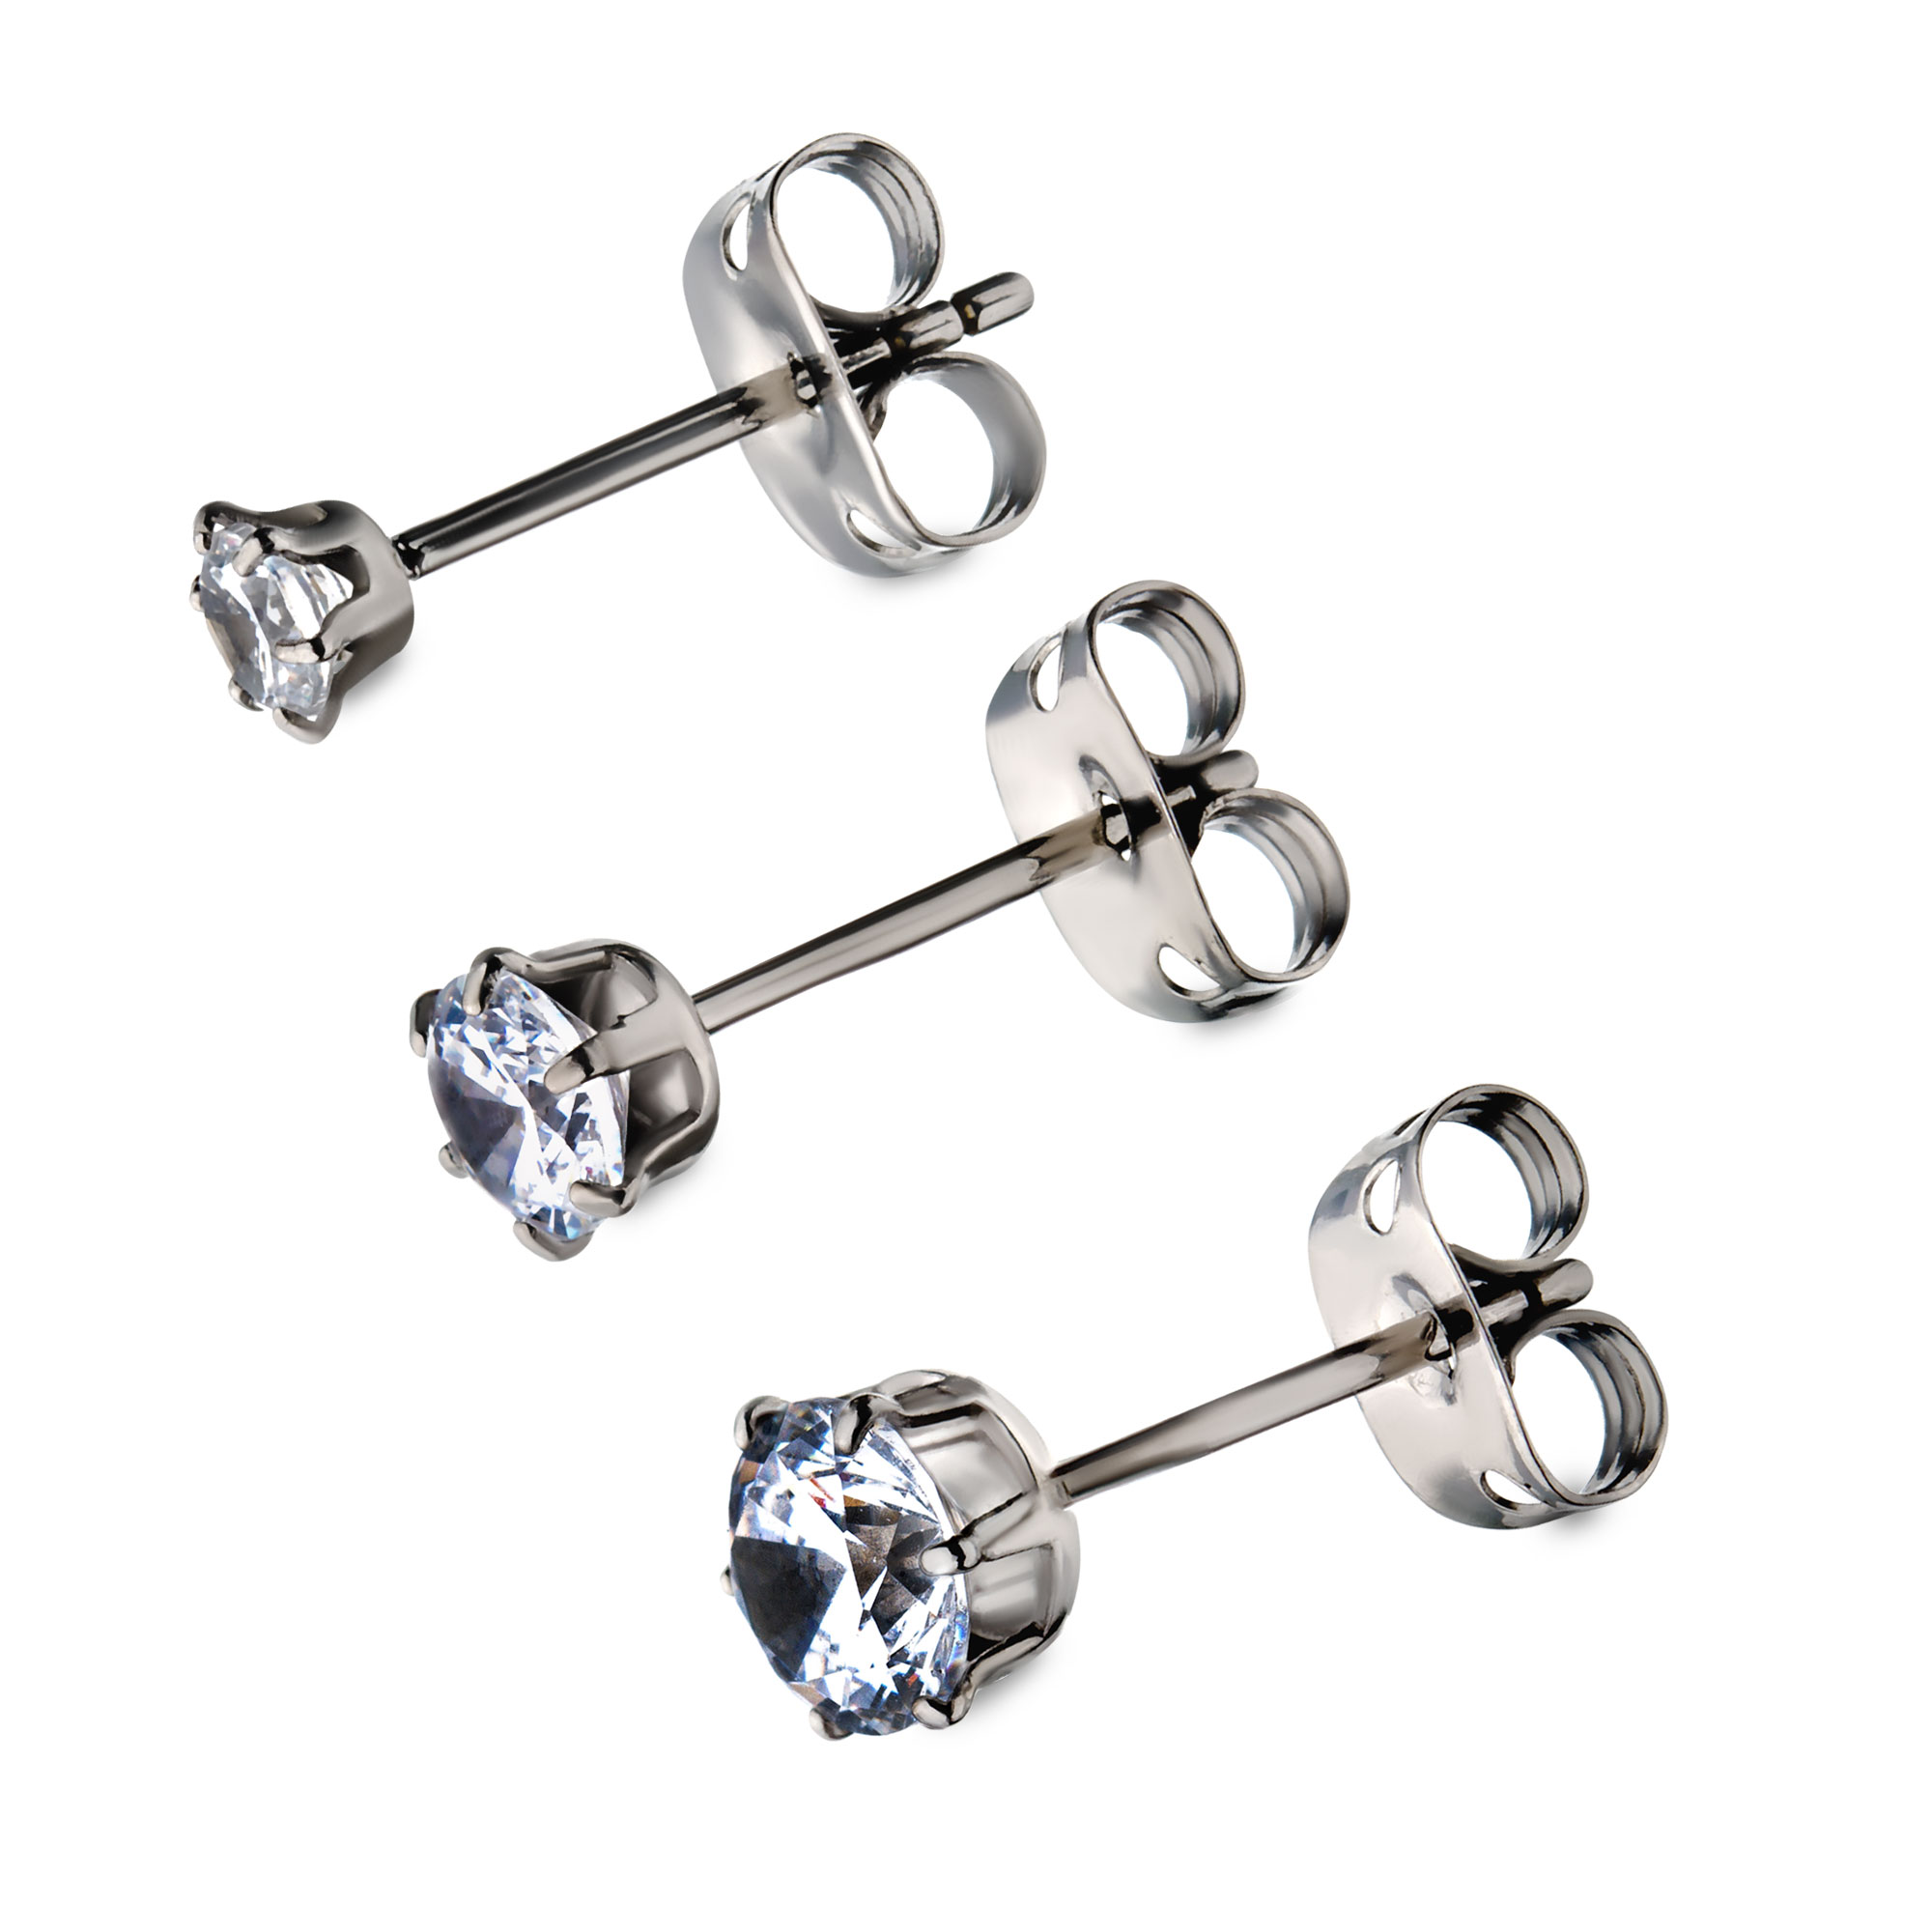 20g Titanium Post and Butterfly Back with Prong Set CZ Stud Earrings Image 2 Milano Jewelers Pembroke Pines, FL